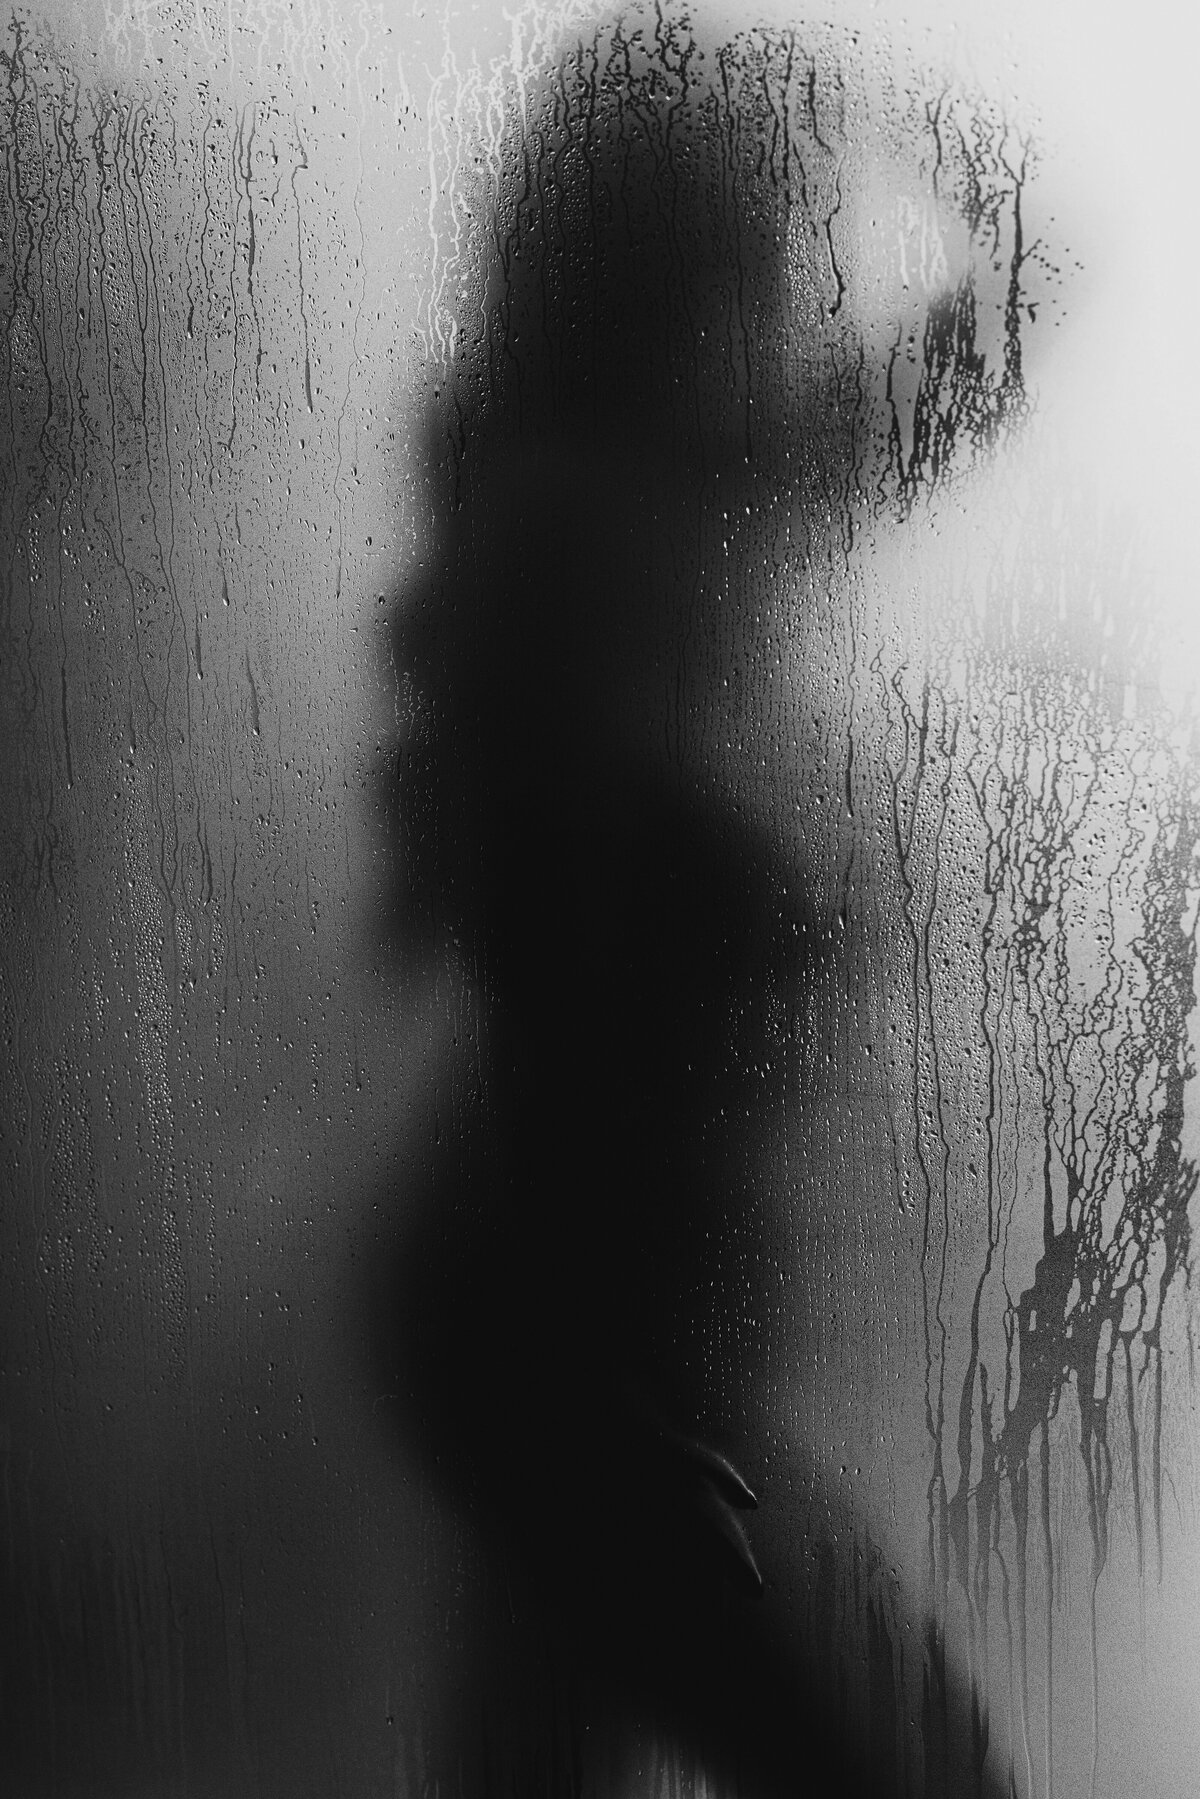 plus size woman silhouette behind a shower door